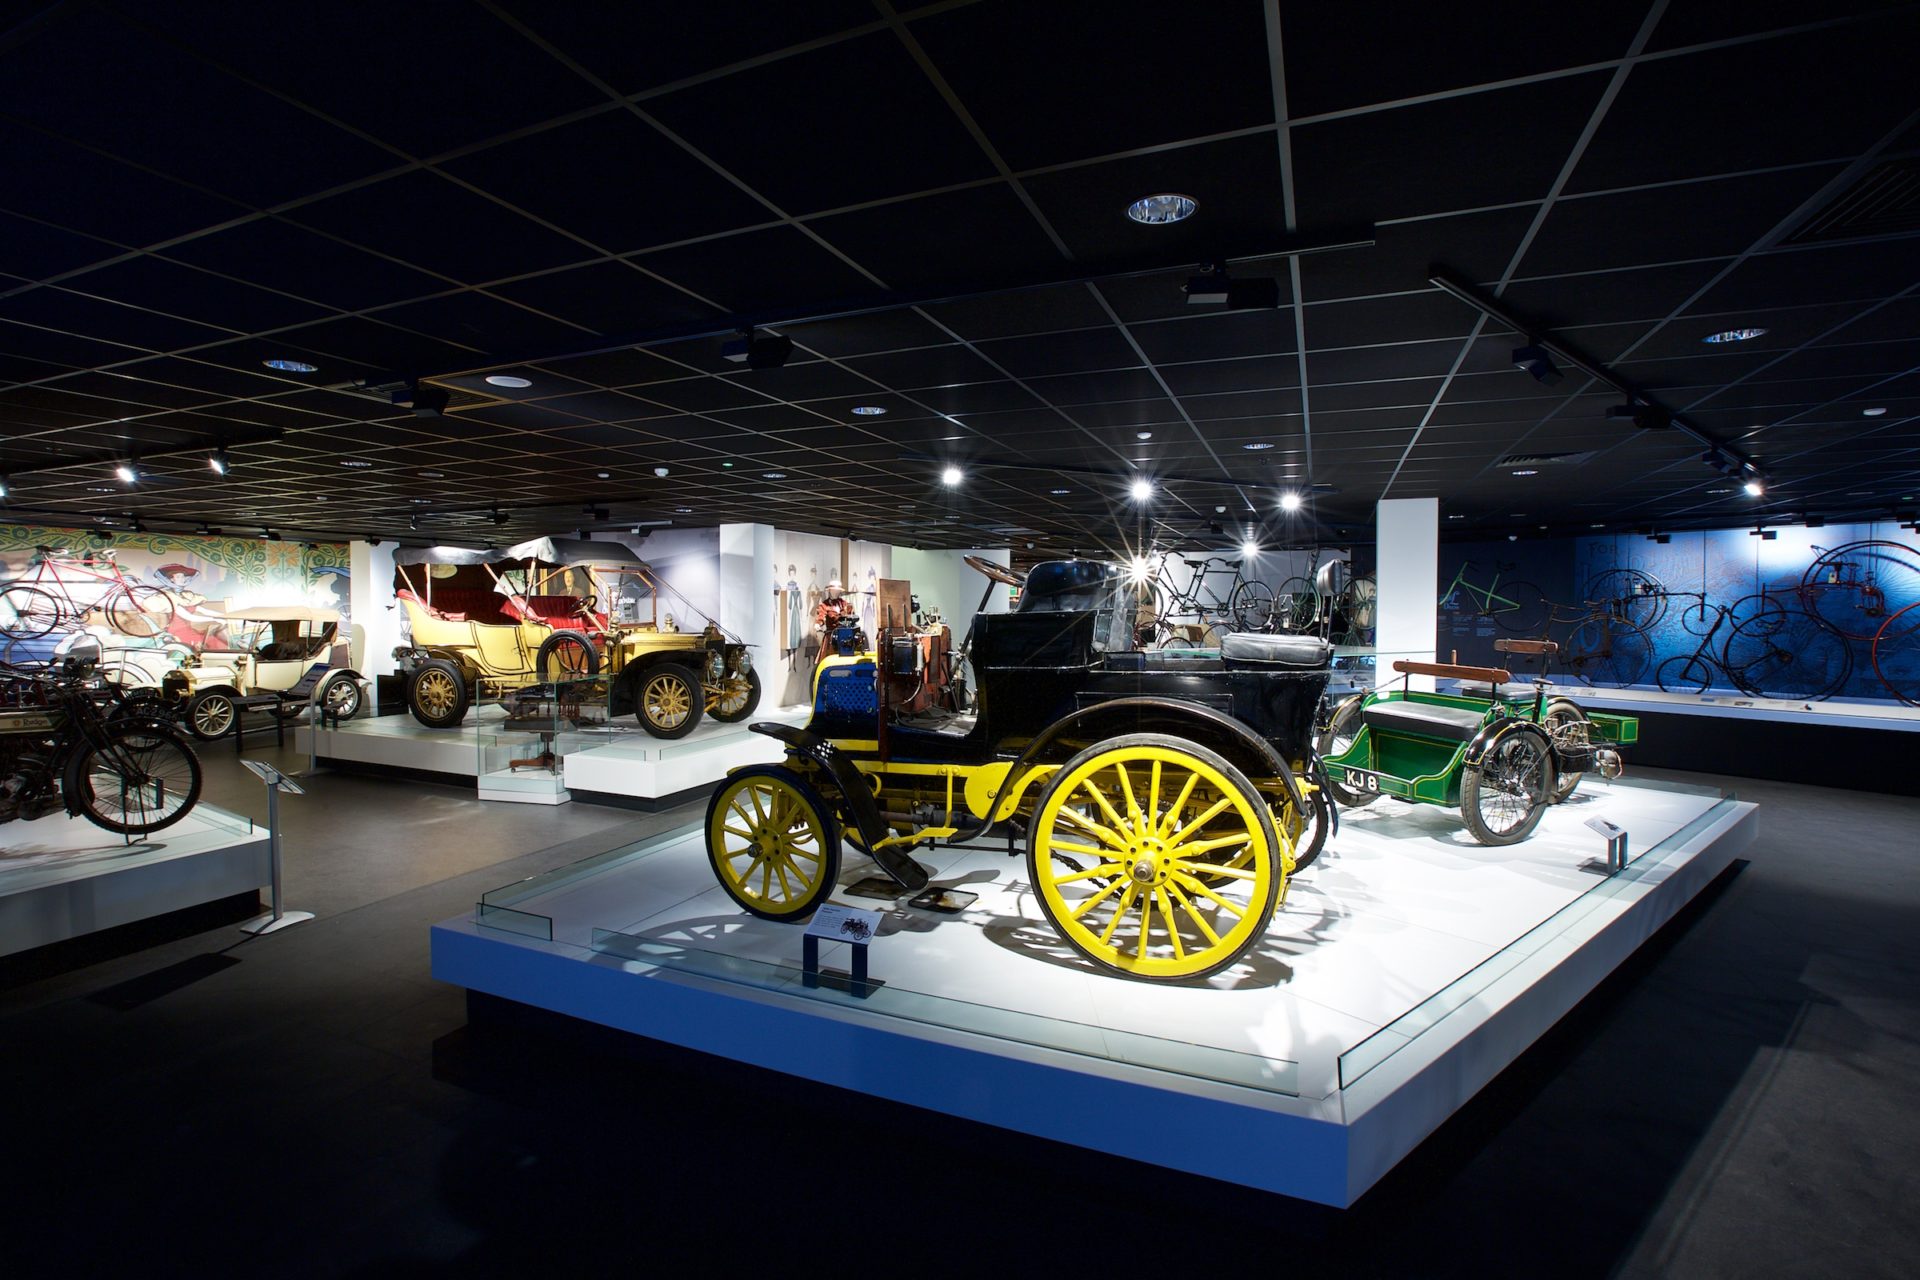 One of the new displays at Coventry Transport Museum